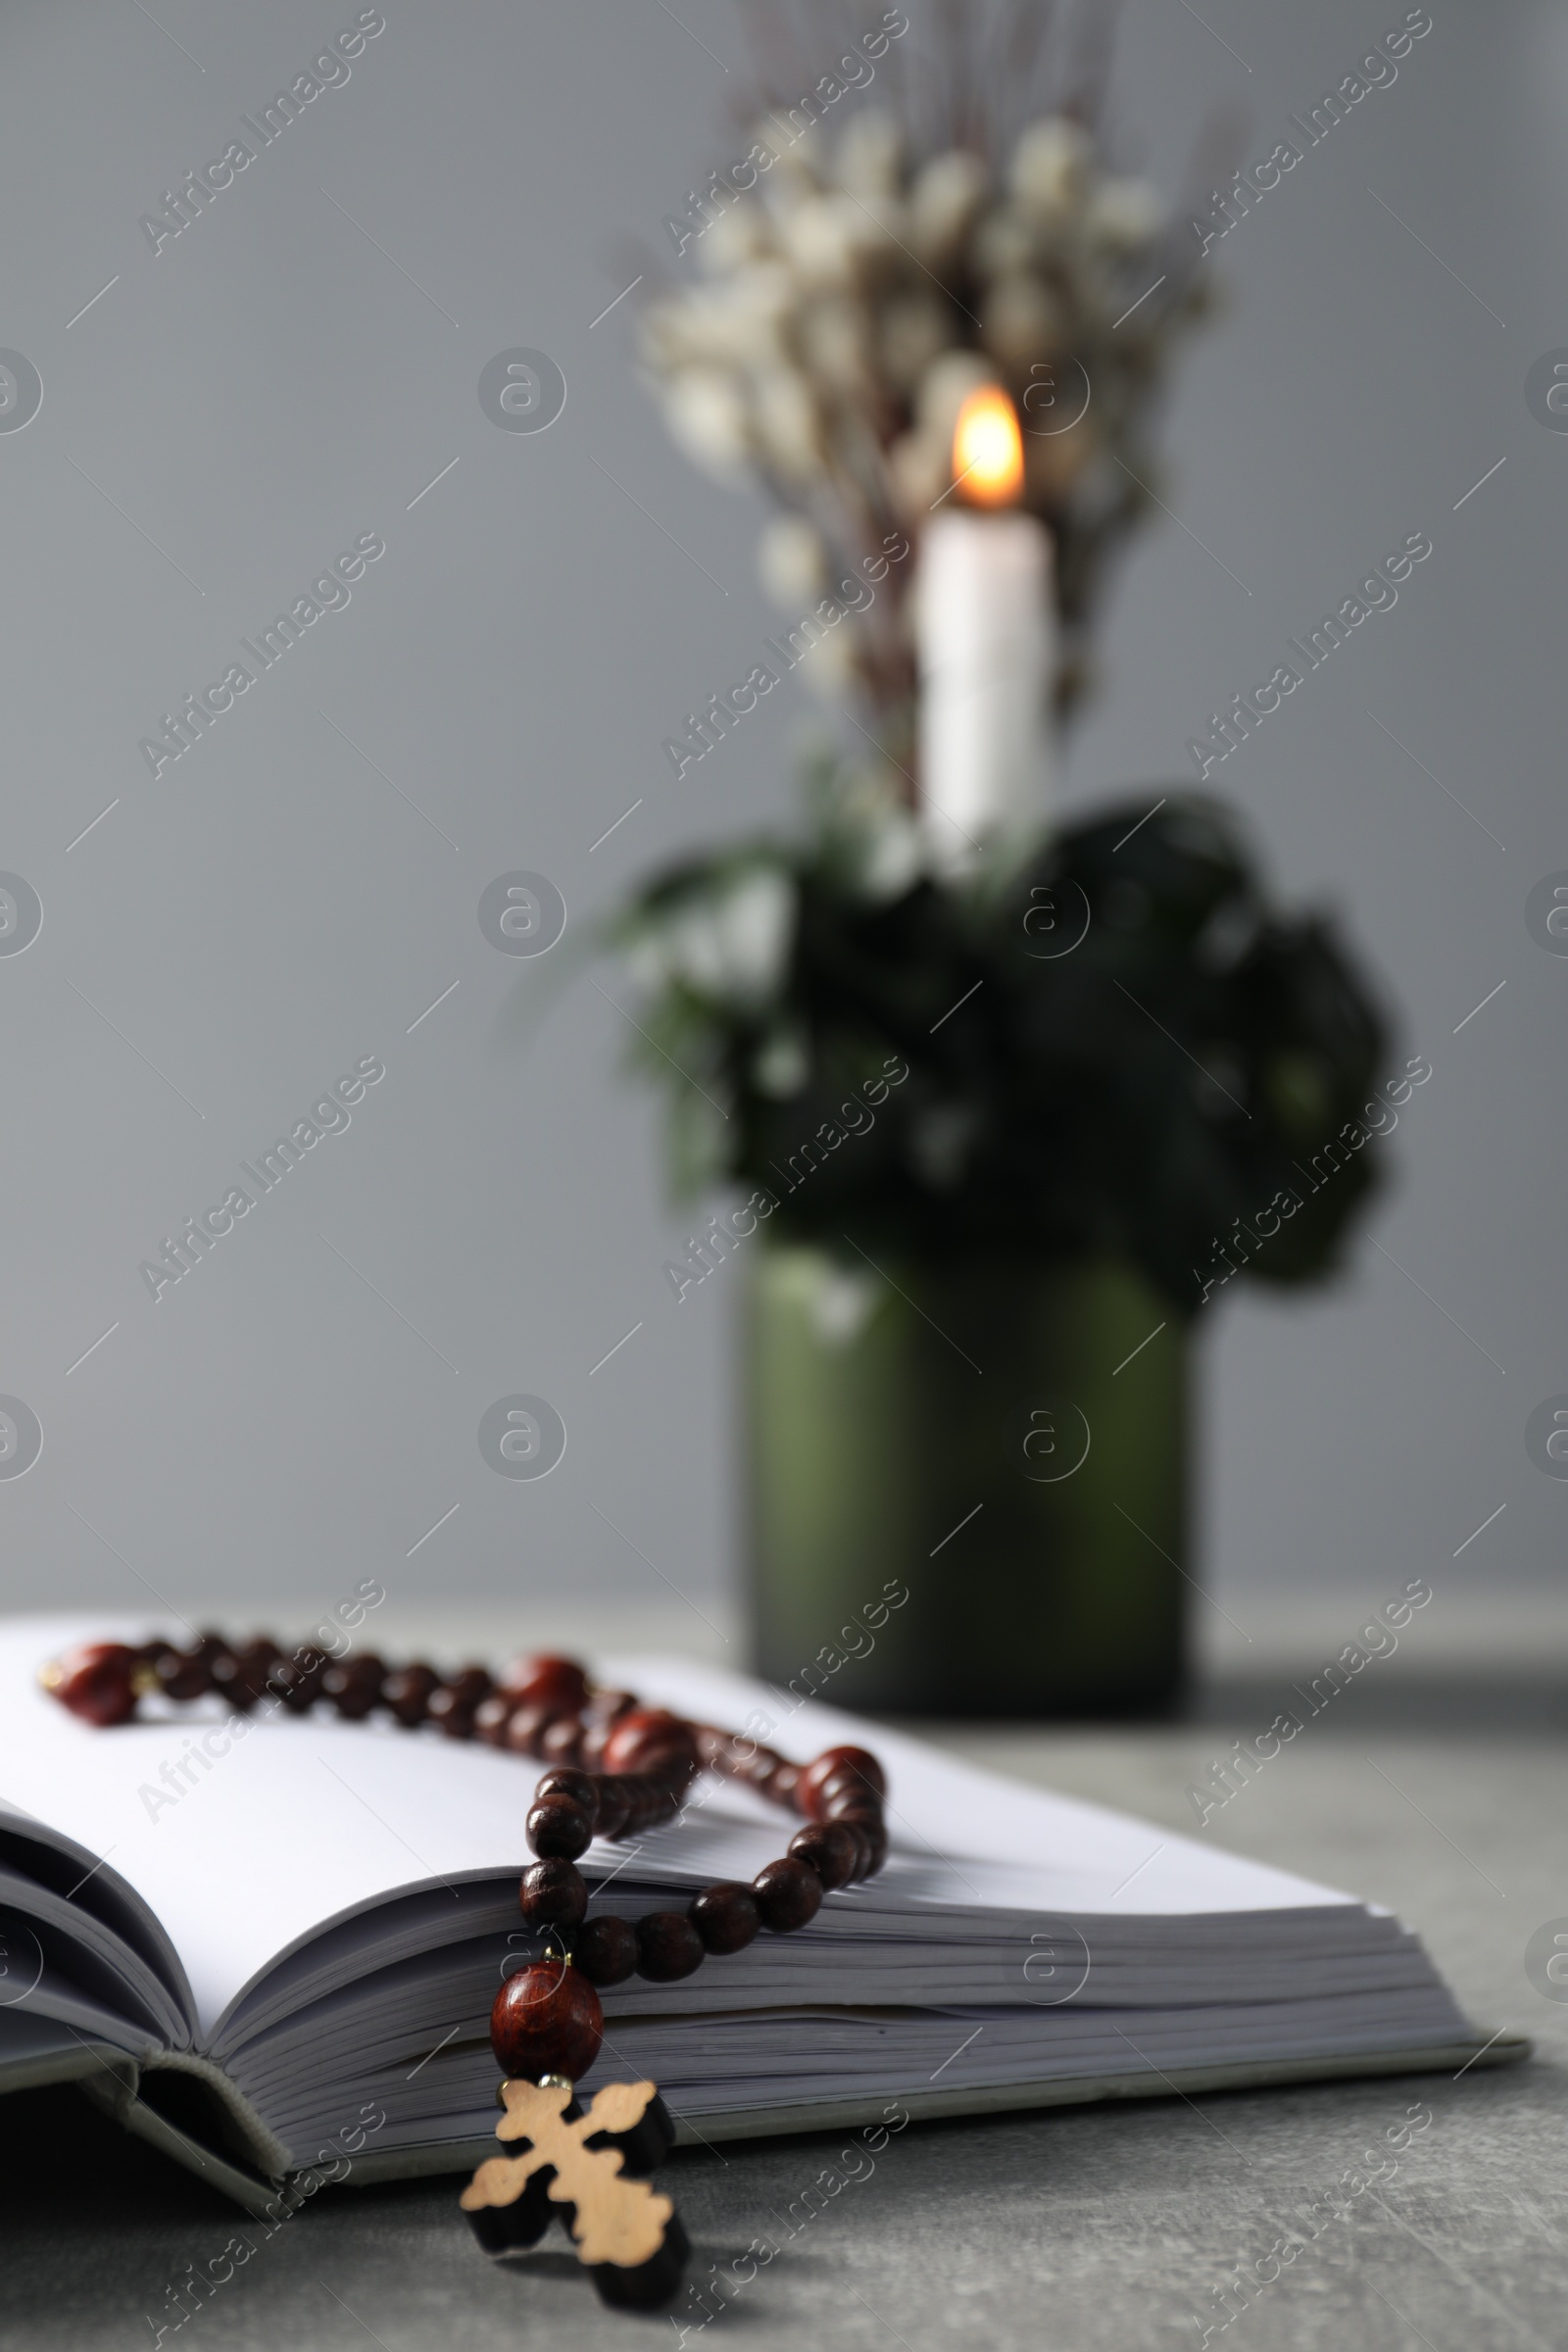 Photo of Bible and rosary beads on grey table, closeup